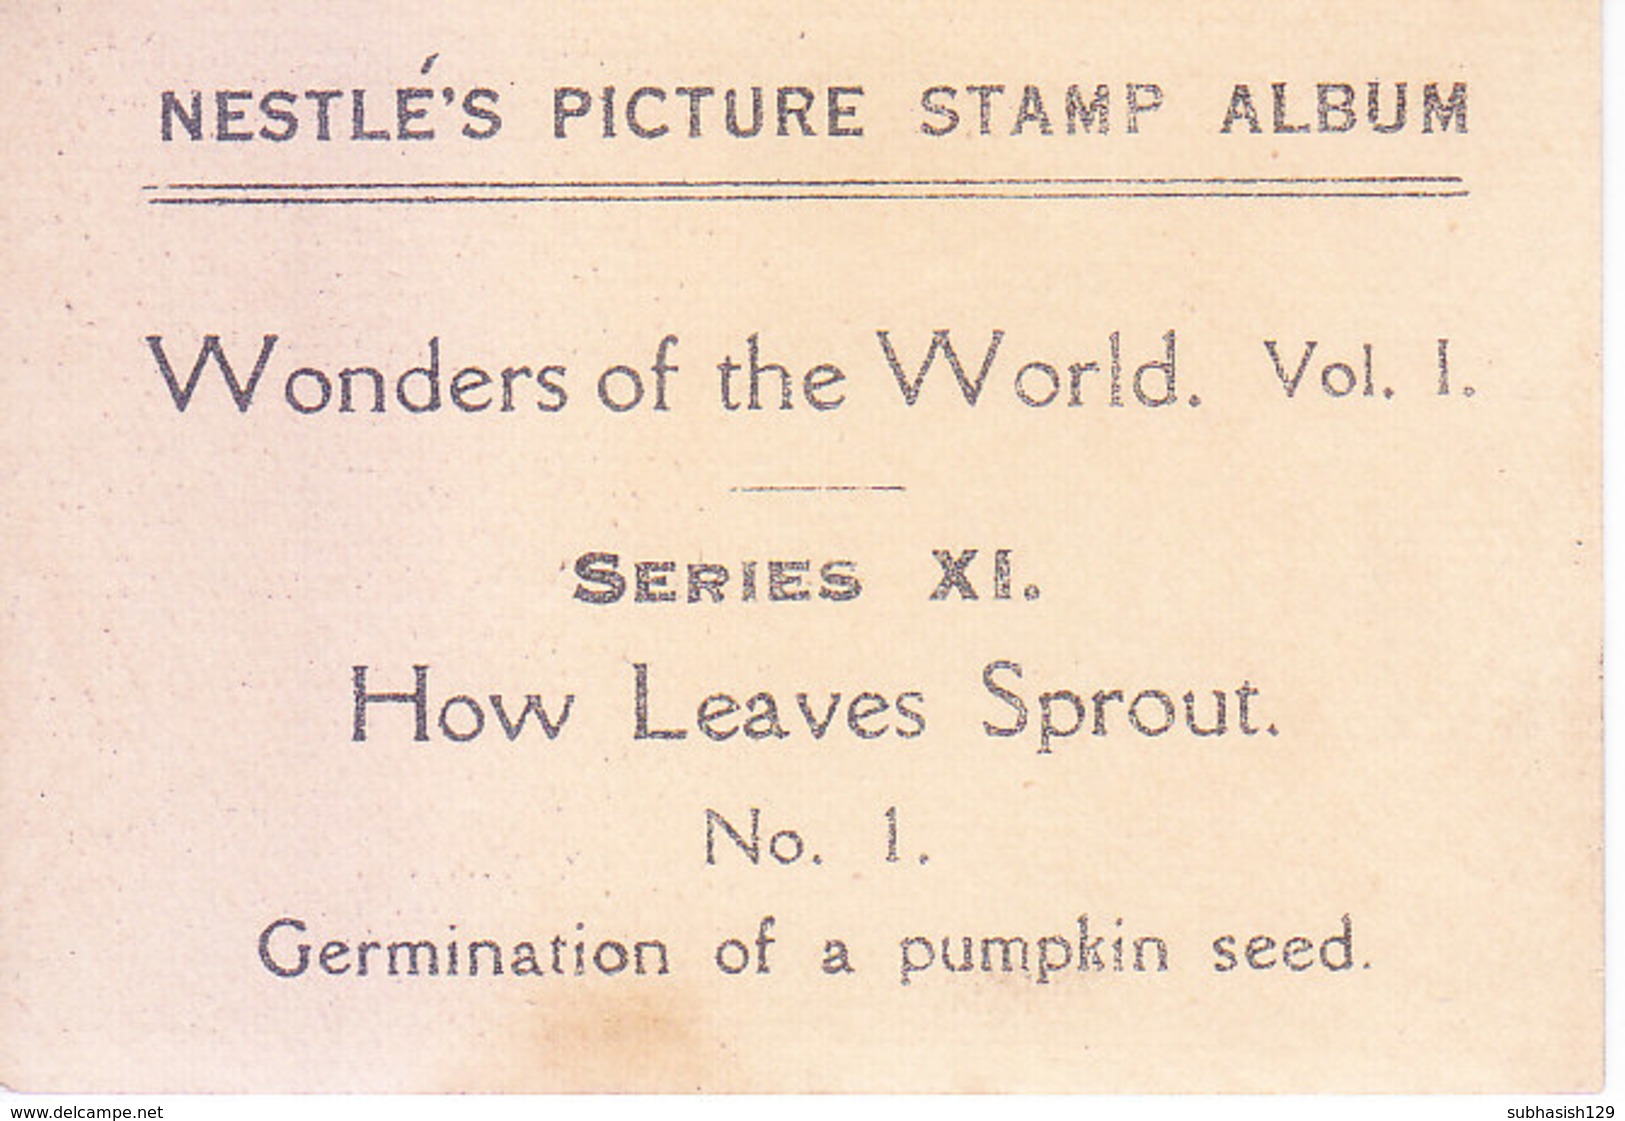 SWITZERLAND - NESTLE 'S PICTURE STAMP / CARD / LABEL - HOW LEAVES SPROUT - Advertising